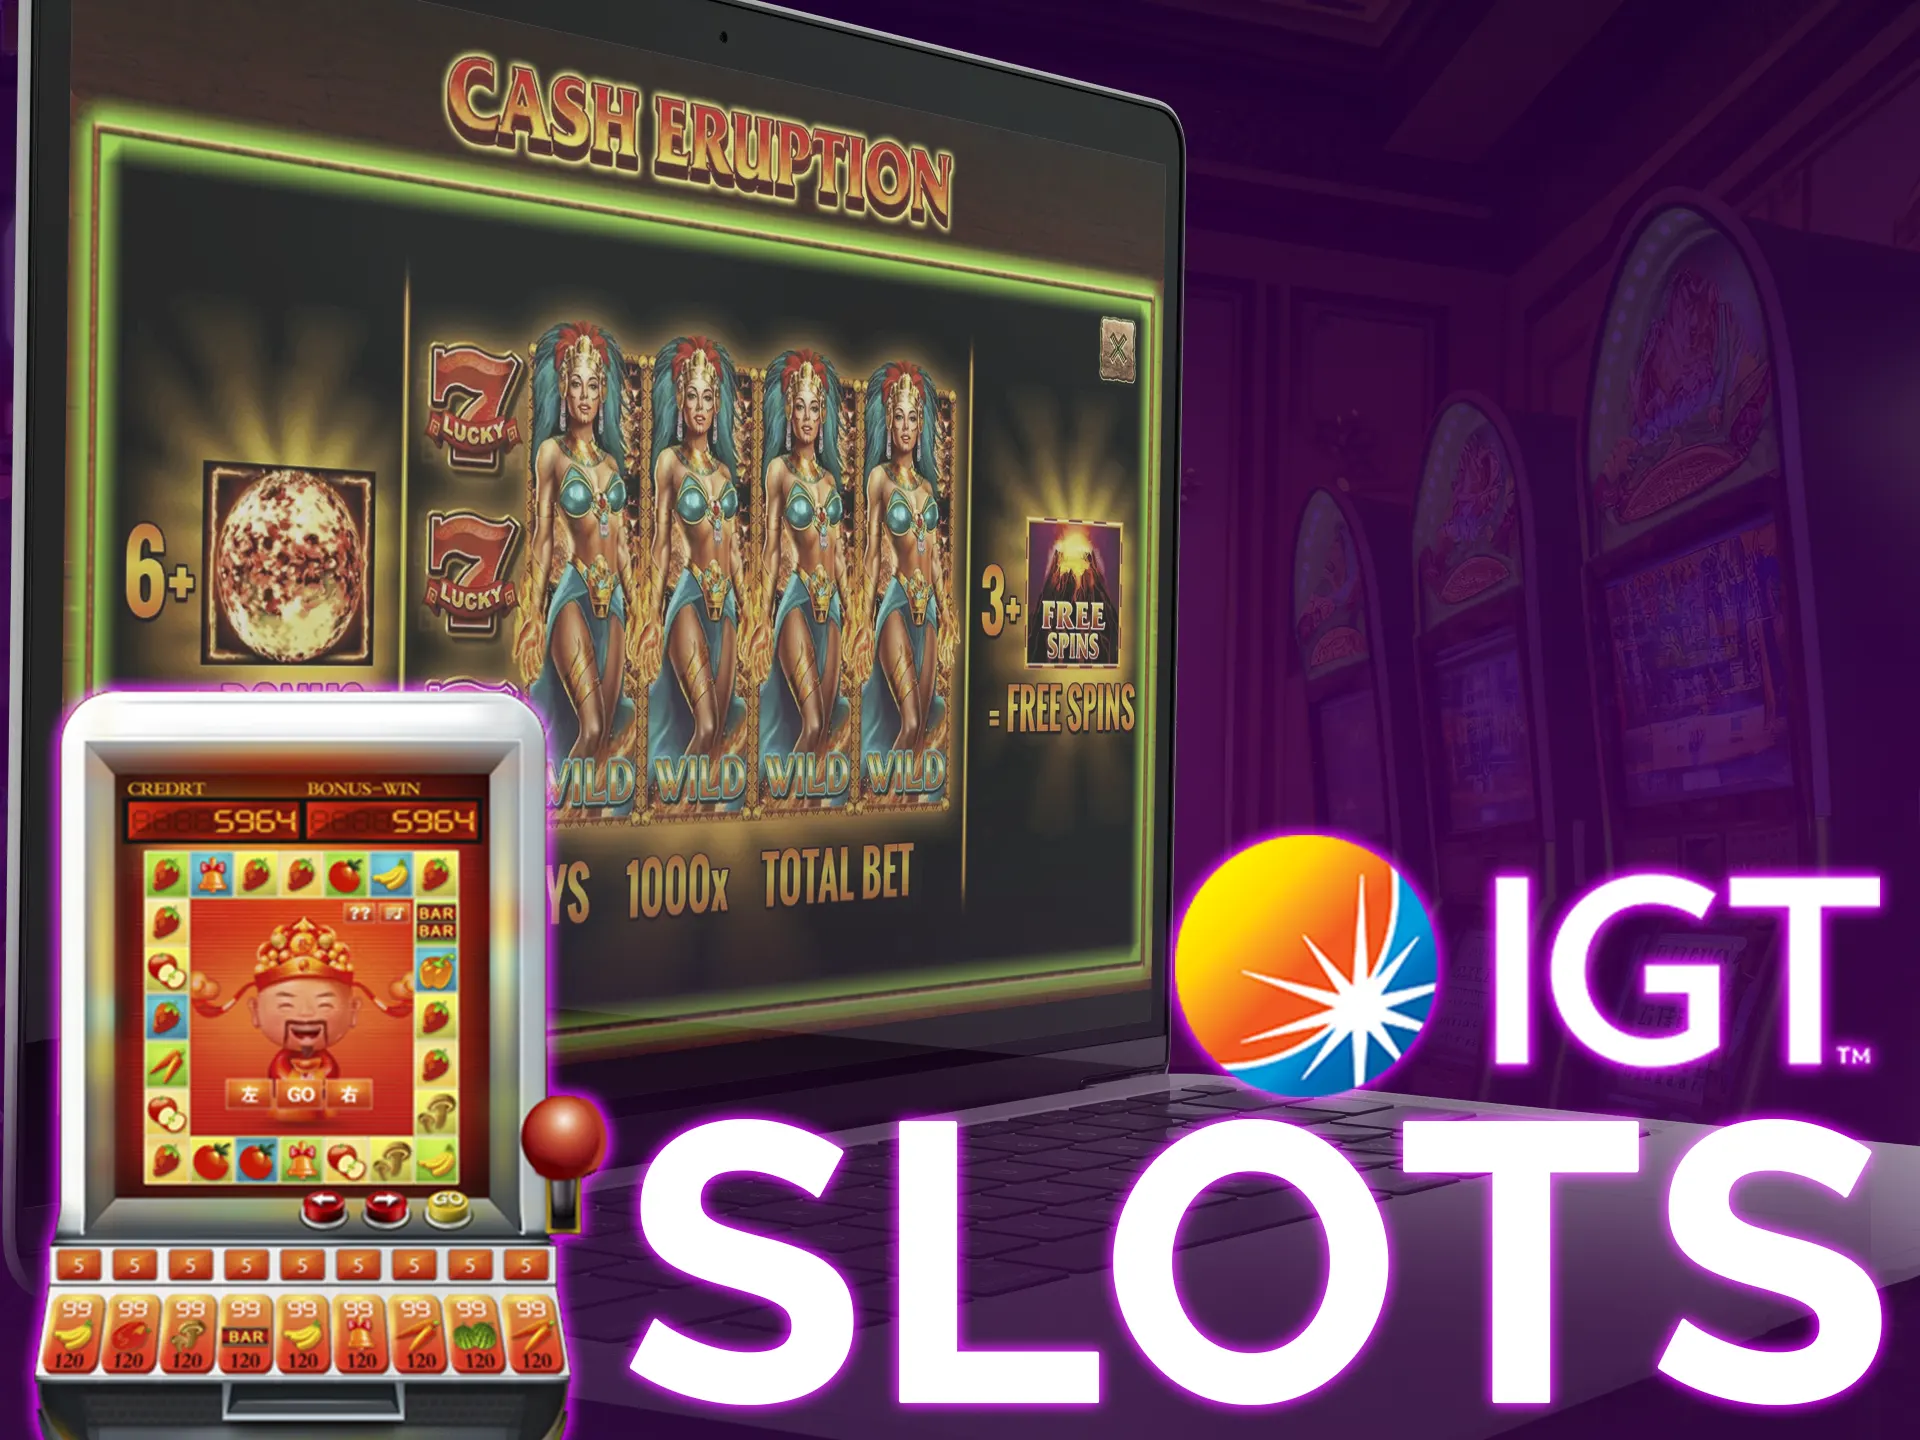 Enjoy a high number and variety of slots from IGT.